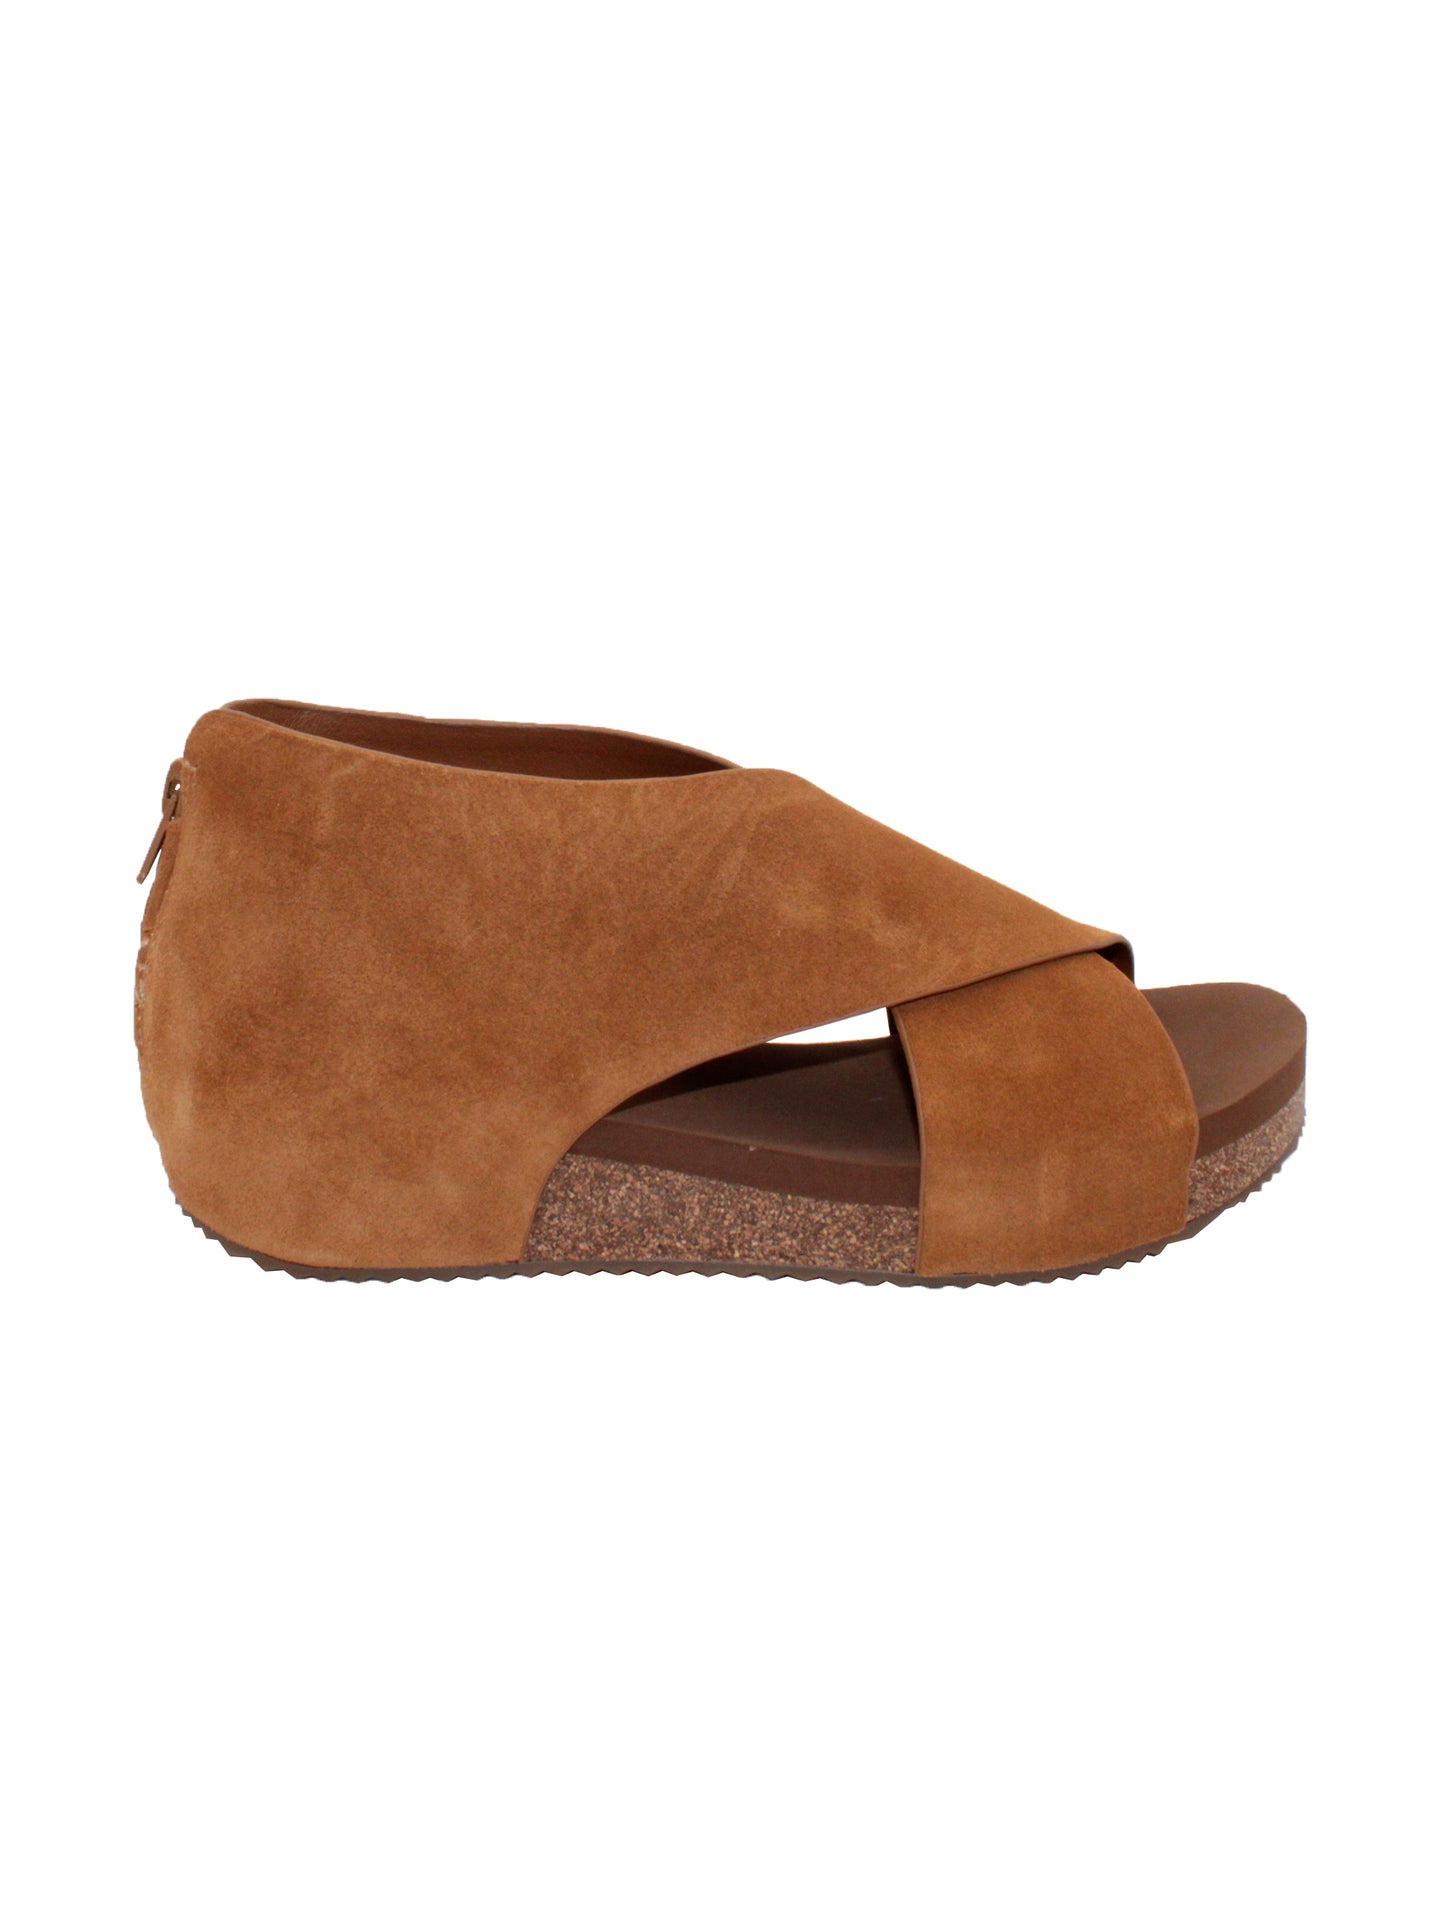 The ‘Alton’ tan sandals by Volatile are made from plush genuine suede and designed with crisscross straps that meet in the back for a closed-but-open effect suitable for year-round styling. Featuring Volatile’s signature ultra-comfort EVA insole stationed on a modest low wedge, and durable, non-skid rubber traction soles, these are ideal for all day walking. side